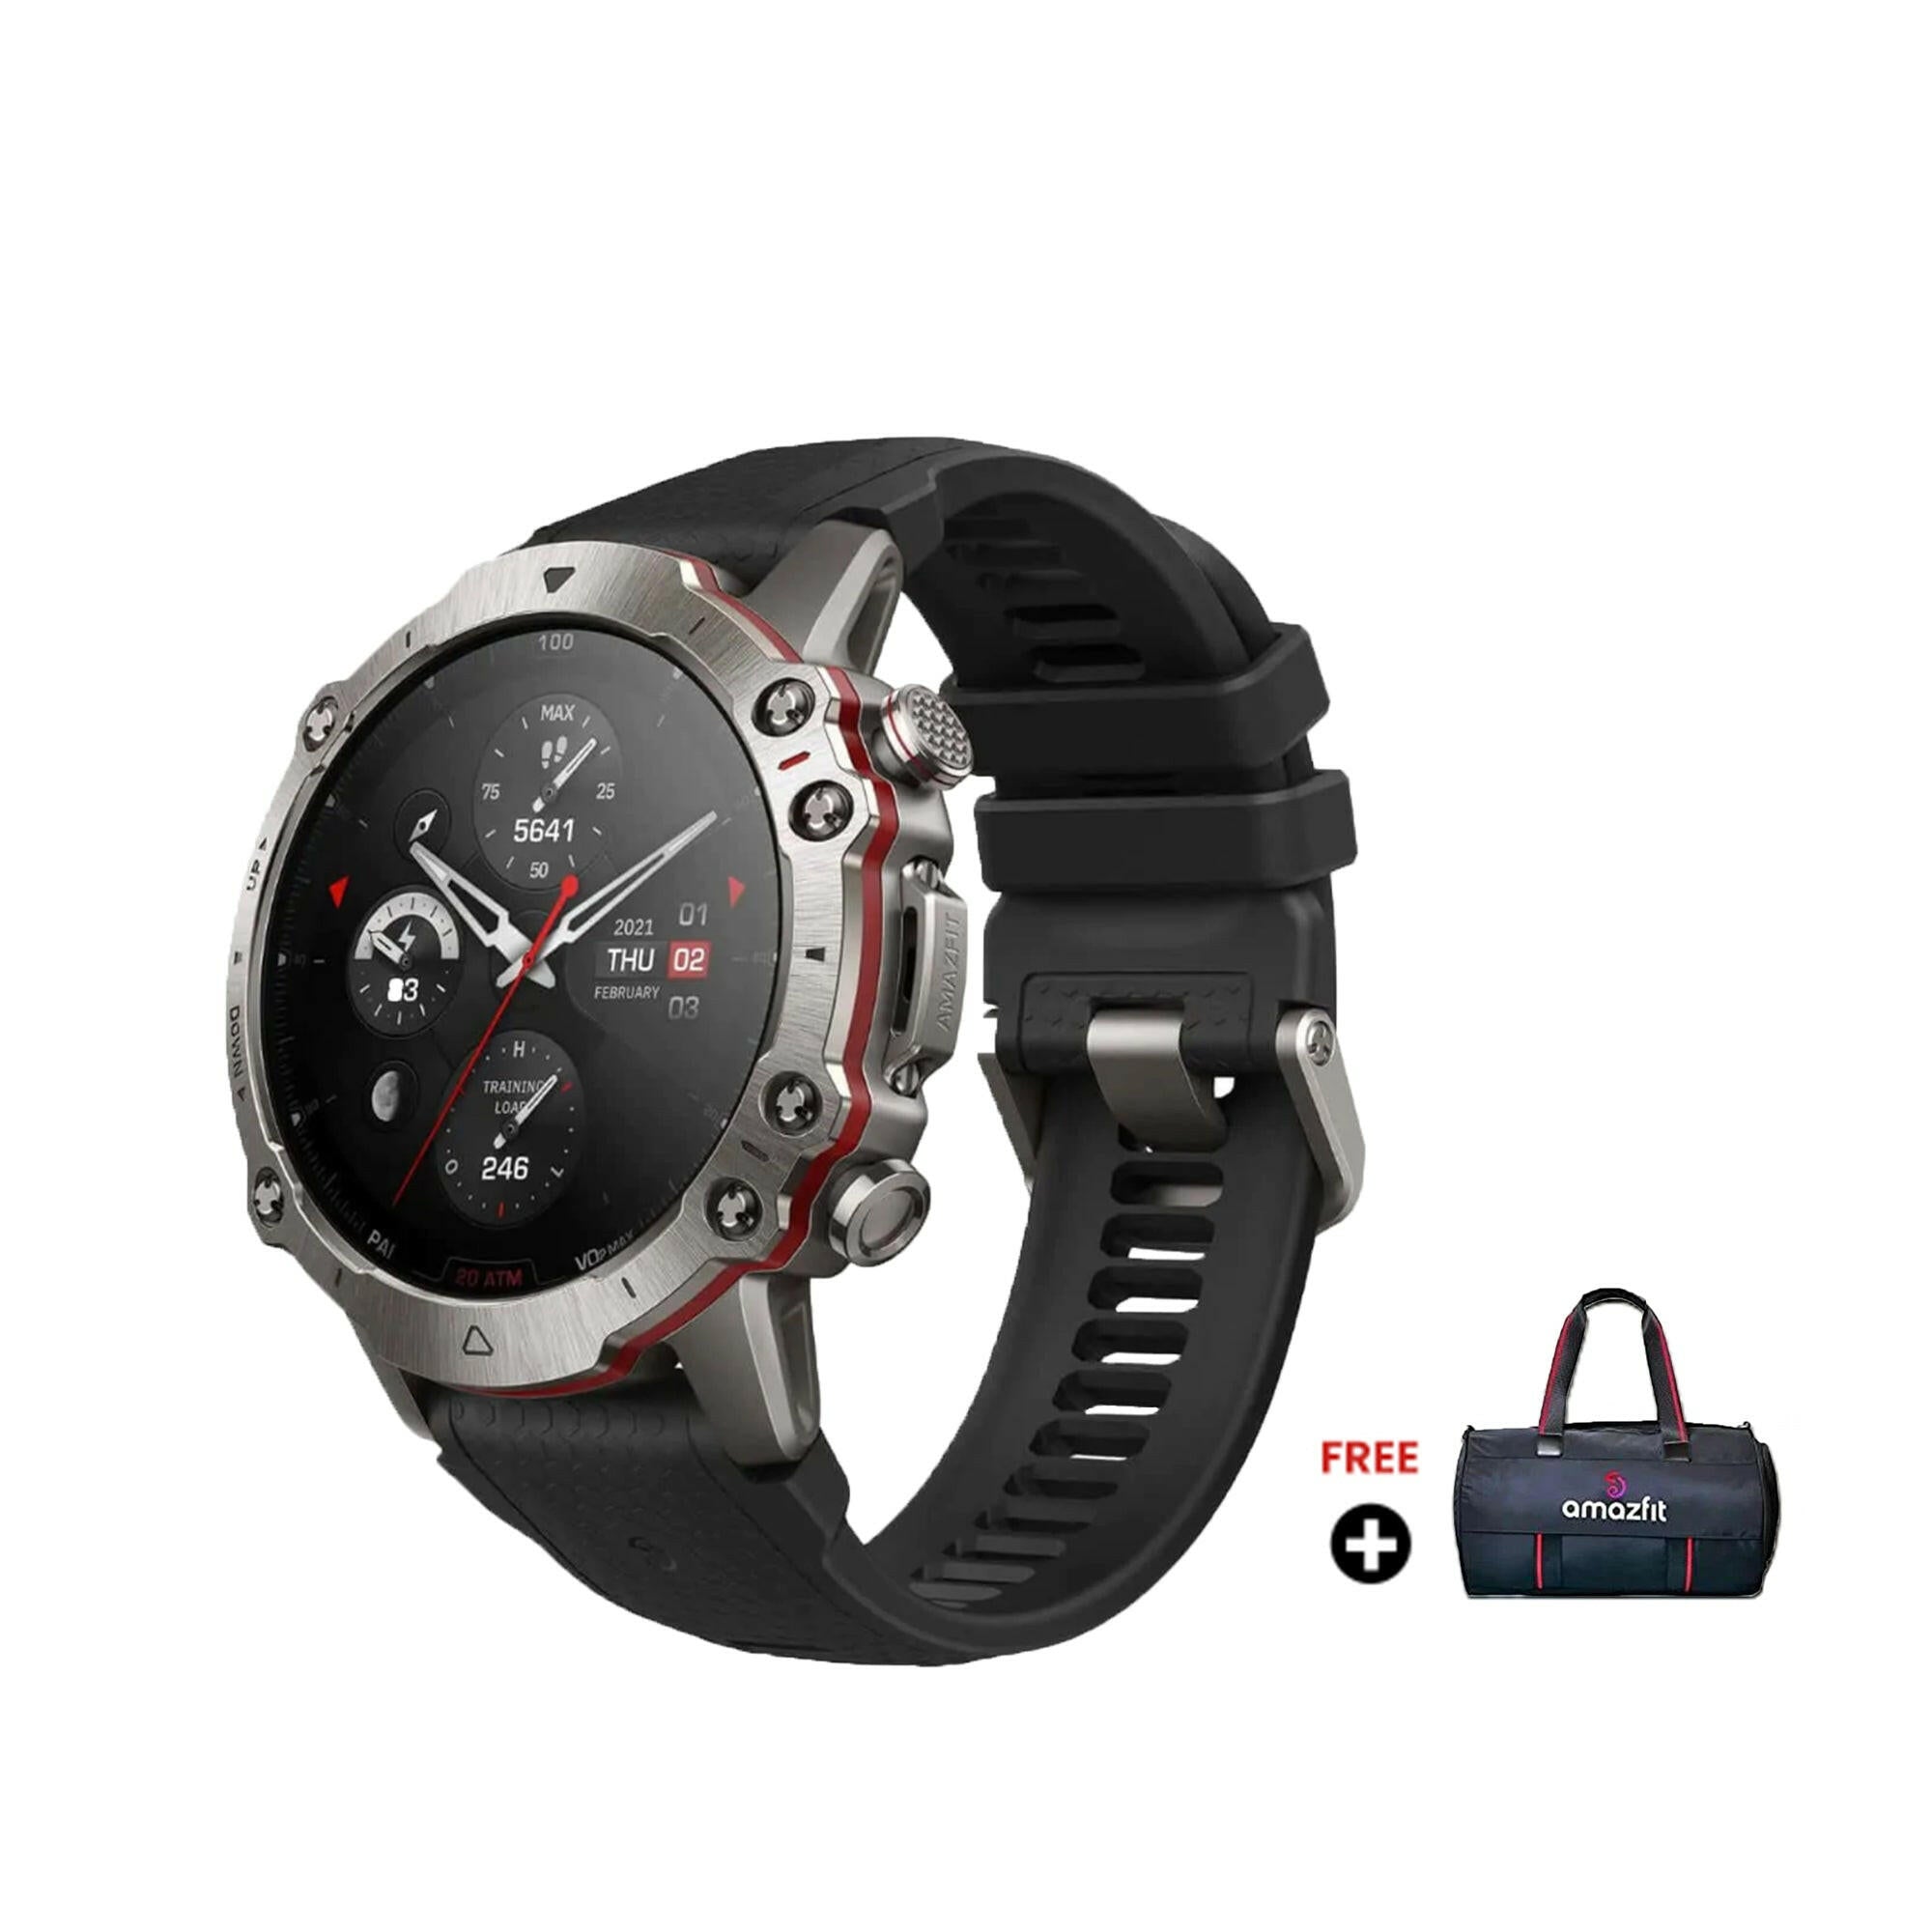 Amazfit - The new Amazfit Falcon is built for the elite 